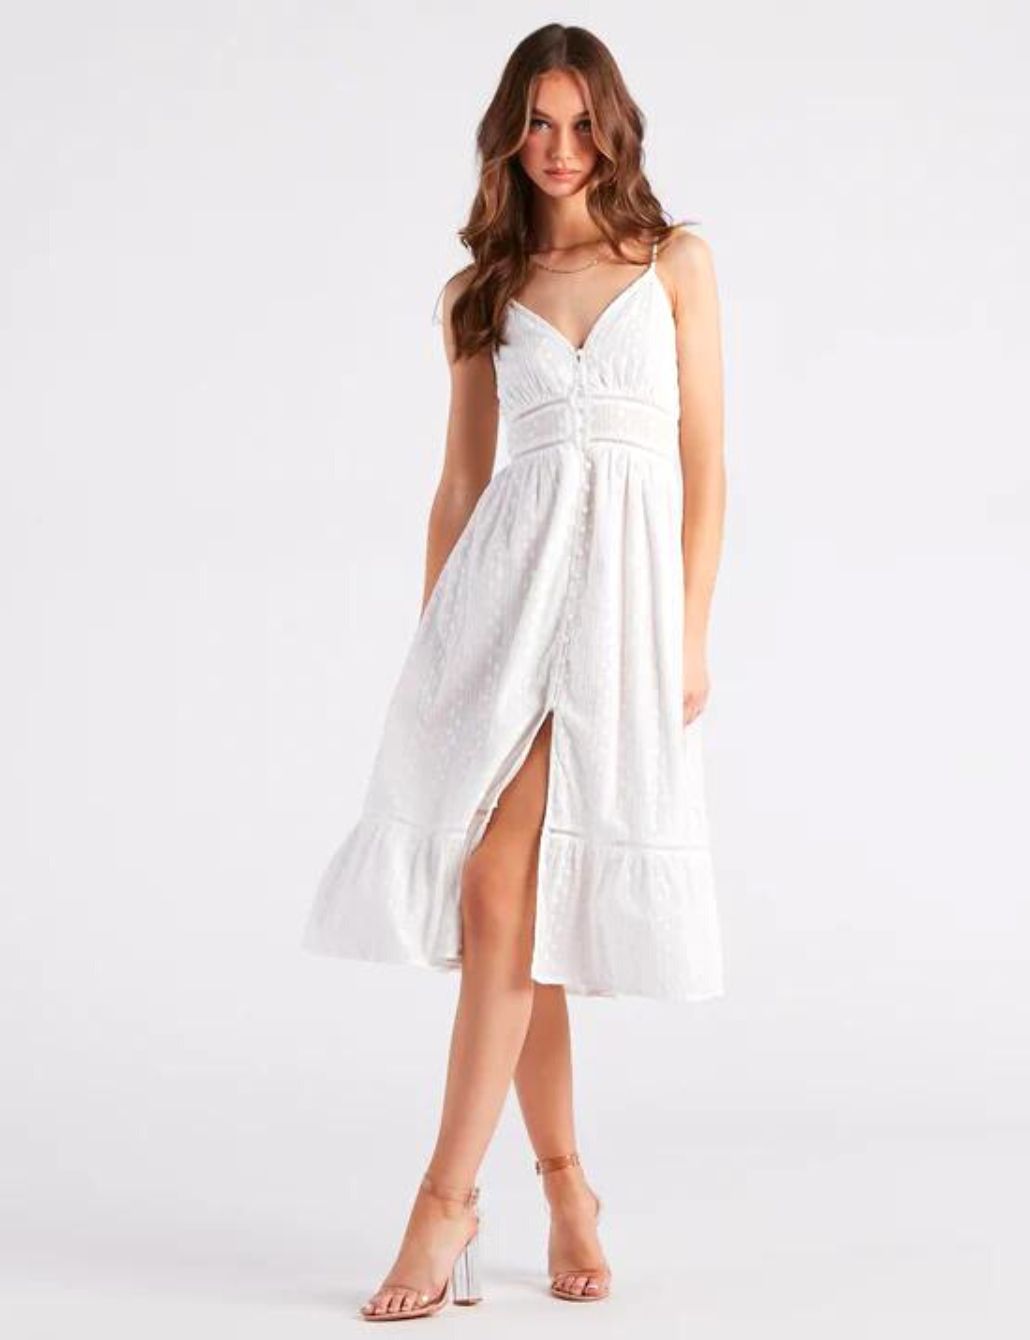 White Dresses | Casual to Formal Dresses in White | Windsor